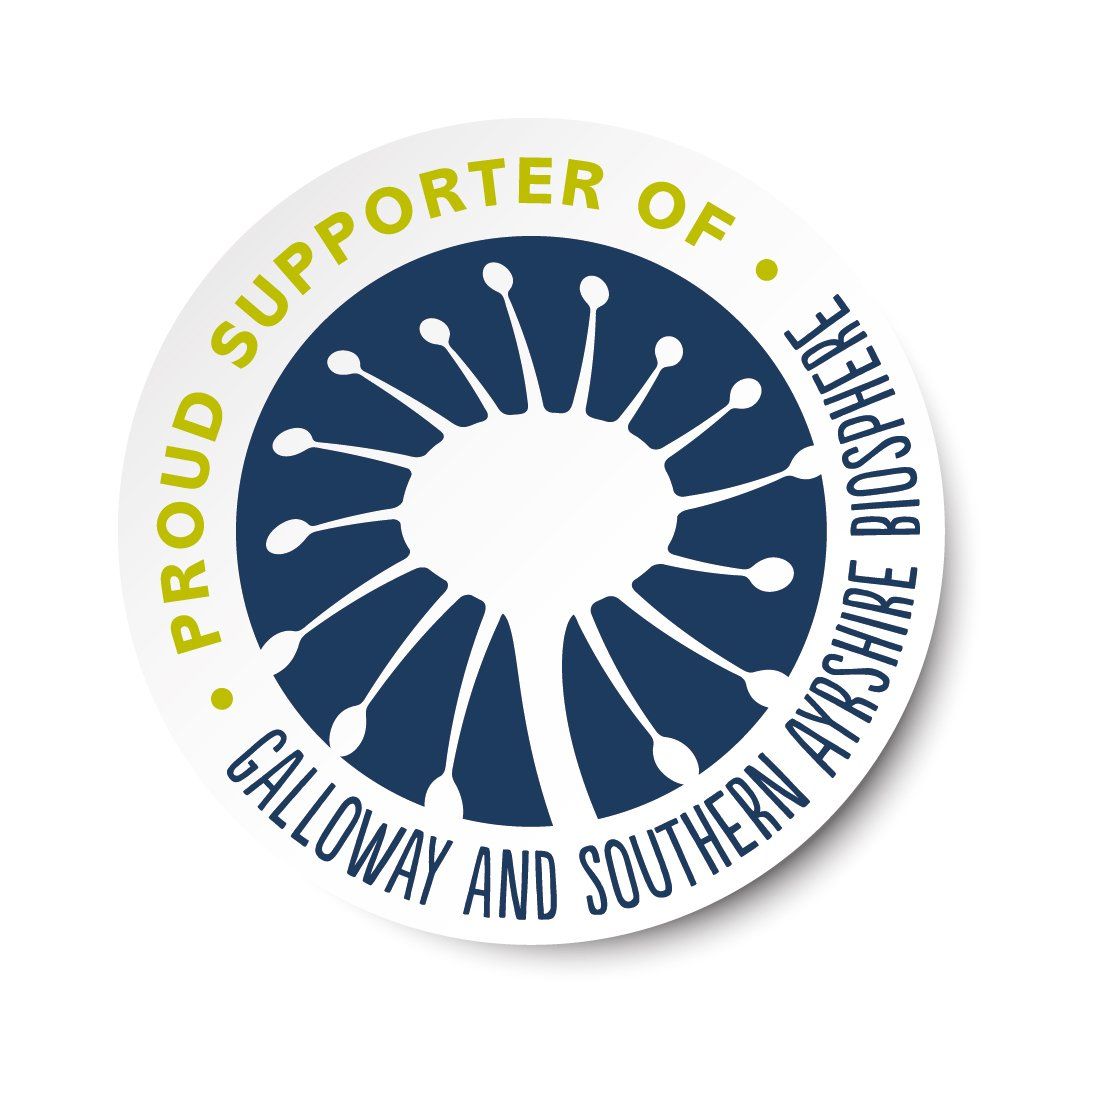 Ingrained Culture is a Proud Supporter of the Galloway and Southern Ayrshire Biosphere logo.